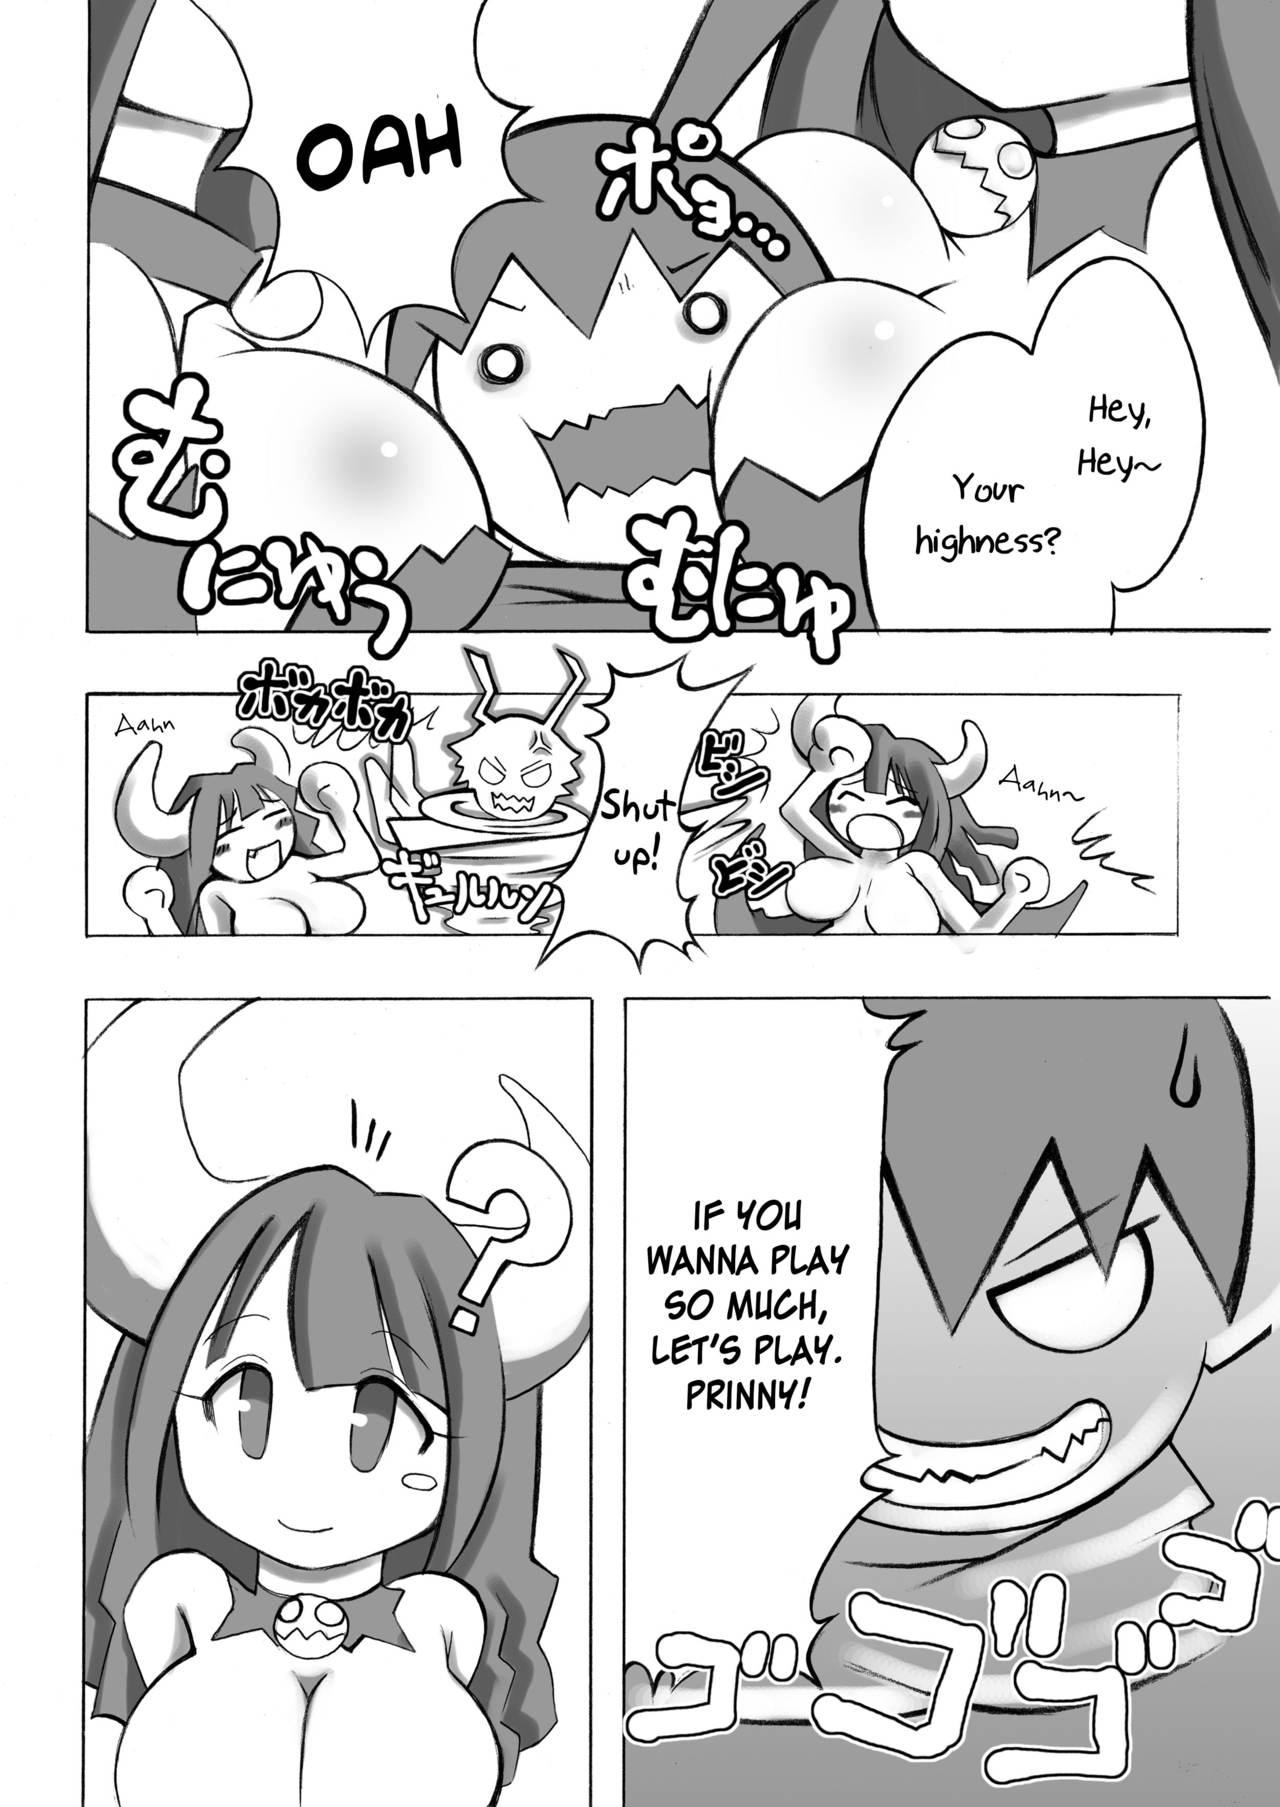 Rimjob Oppai Damee - Disgaea Amateurs Gone Wild - Page 5